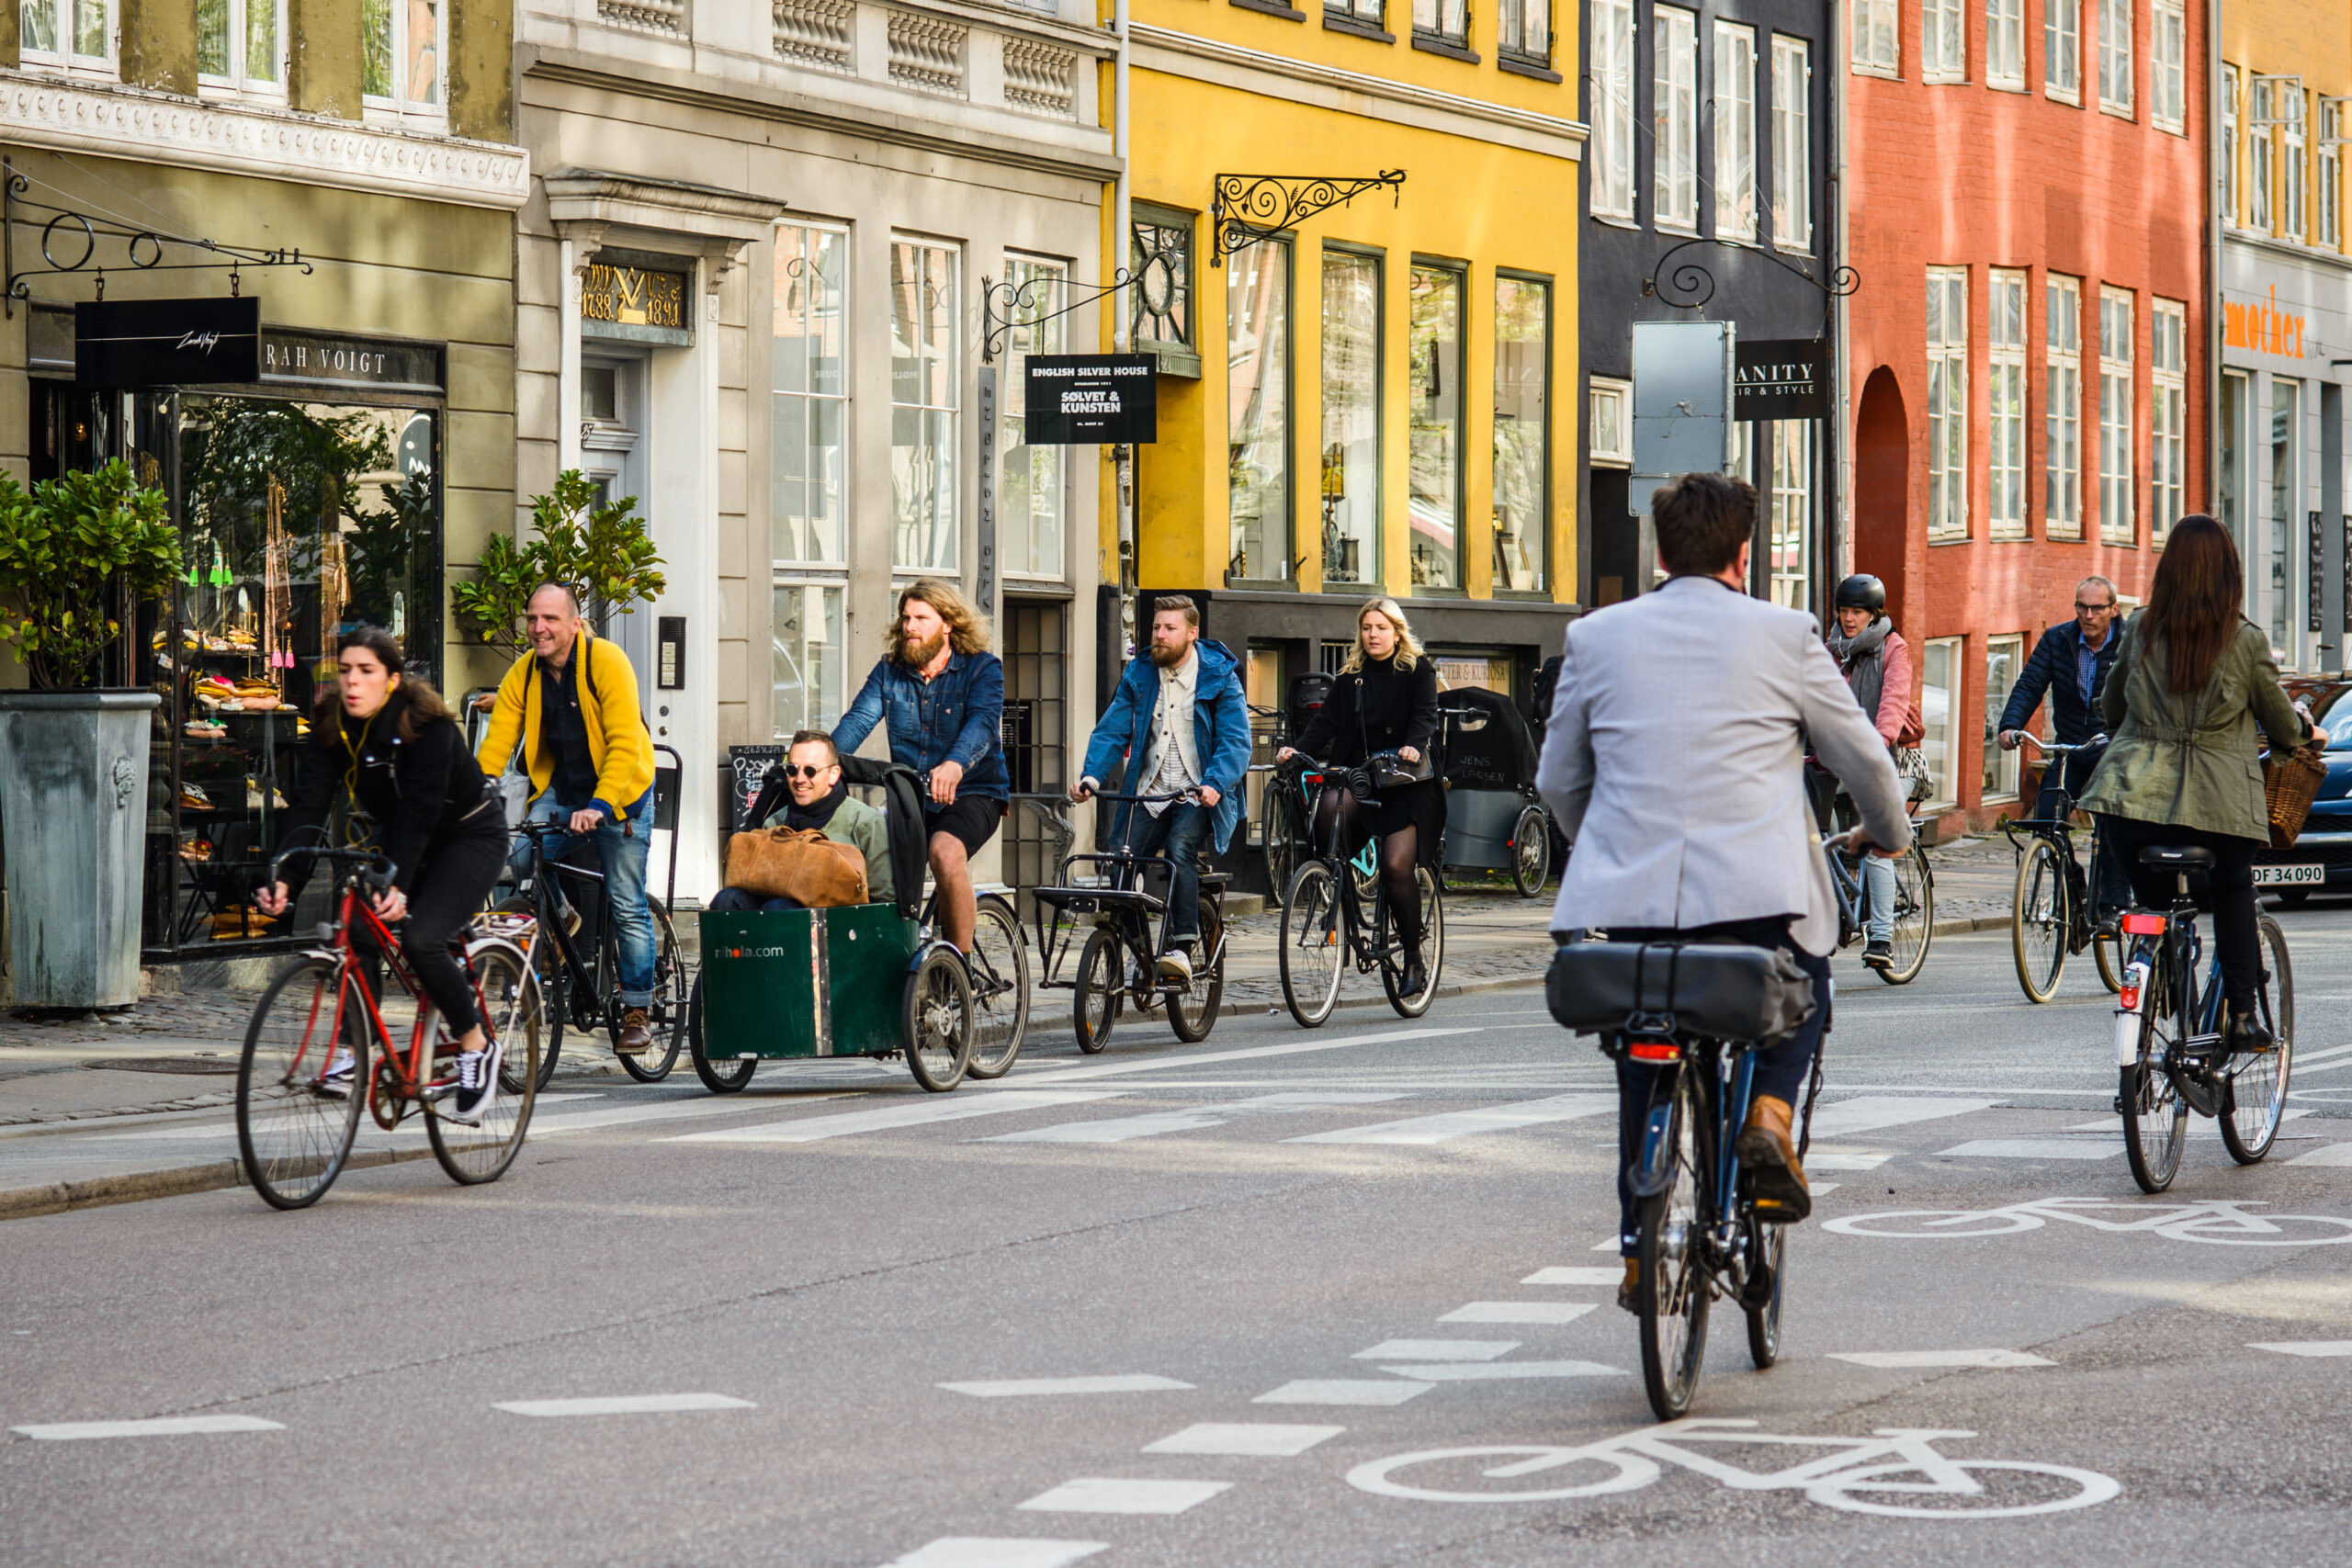 A street in Copenhagen. People ride bicycles on the street in front of colorful rowhouses.